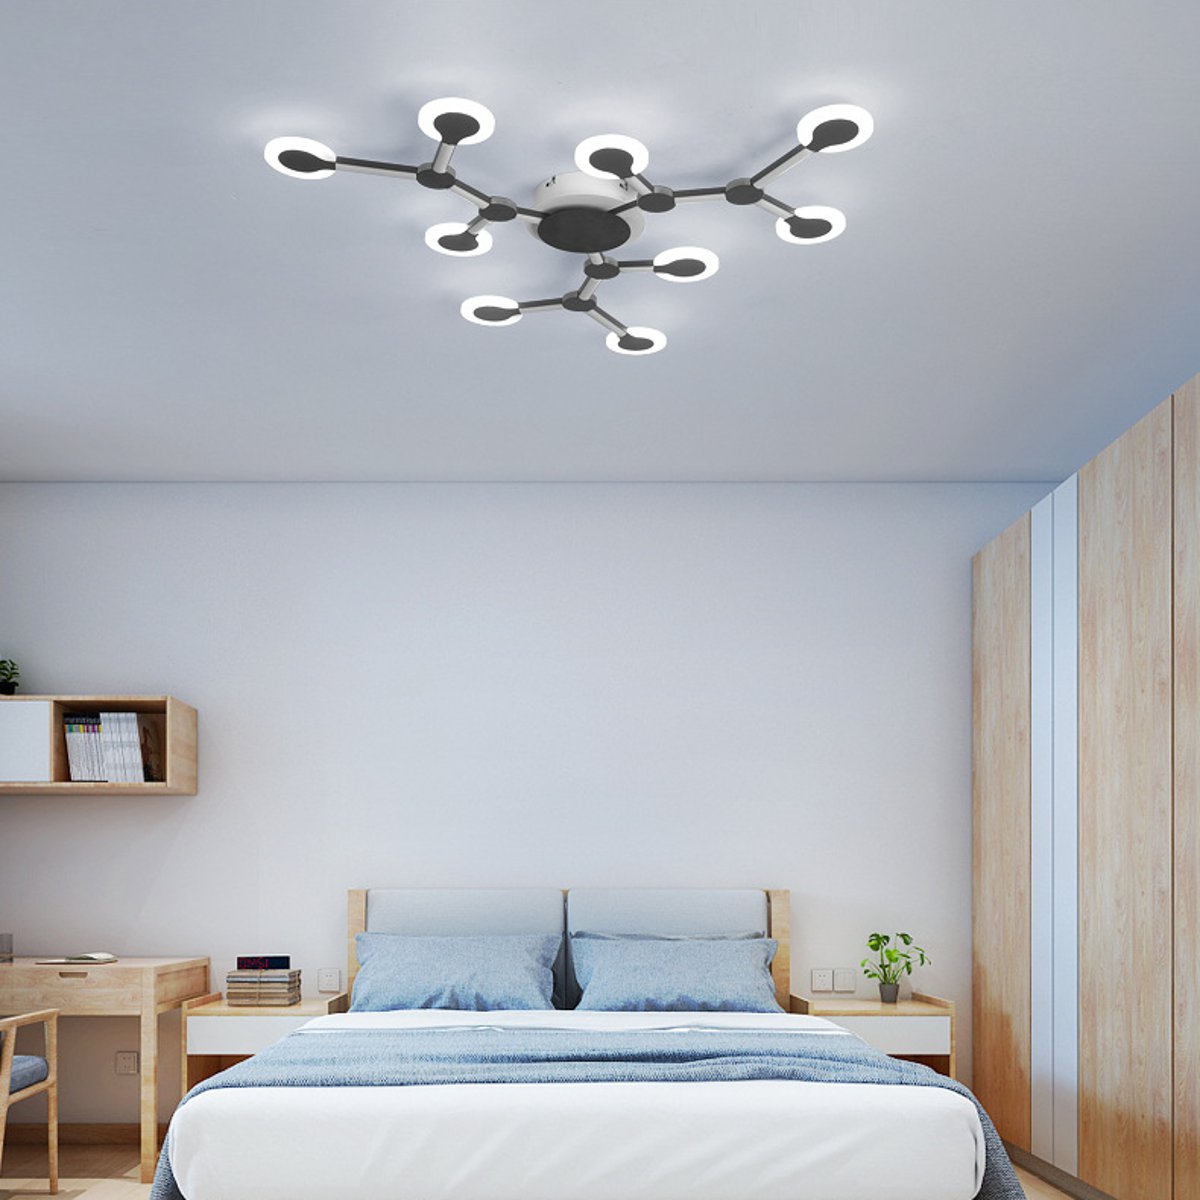 9-Heads-Acrylic-LED-Ceiling-Light-Pendant-Lamp-Hallway-Bedroom-Dimmable-Fixture-1552659-1